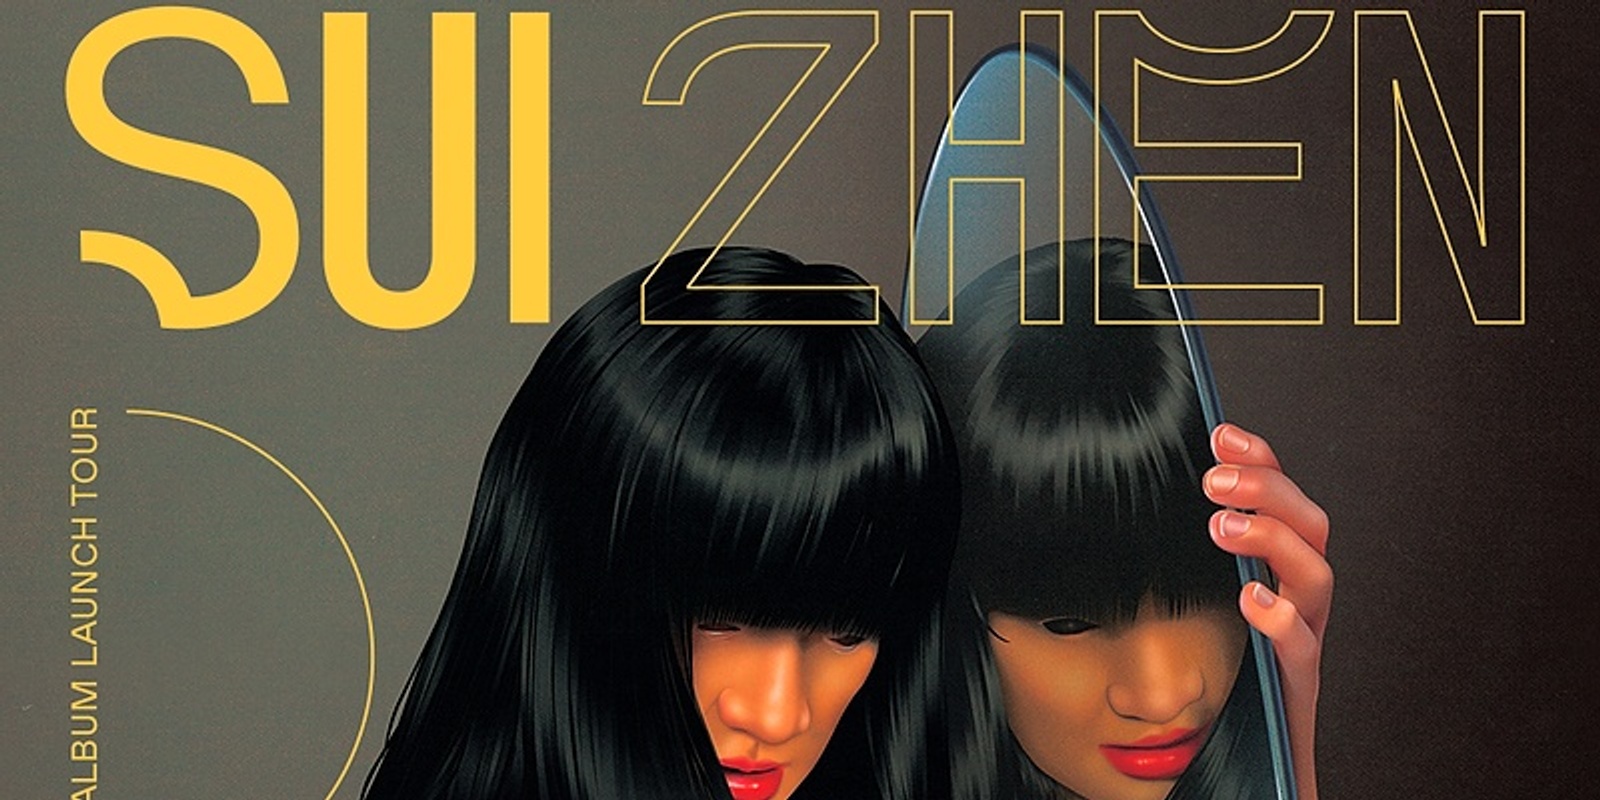 Banner image for Sui Zhen - Losing, Linda Album Launch - Canberra